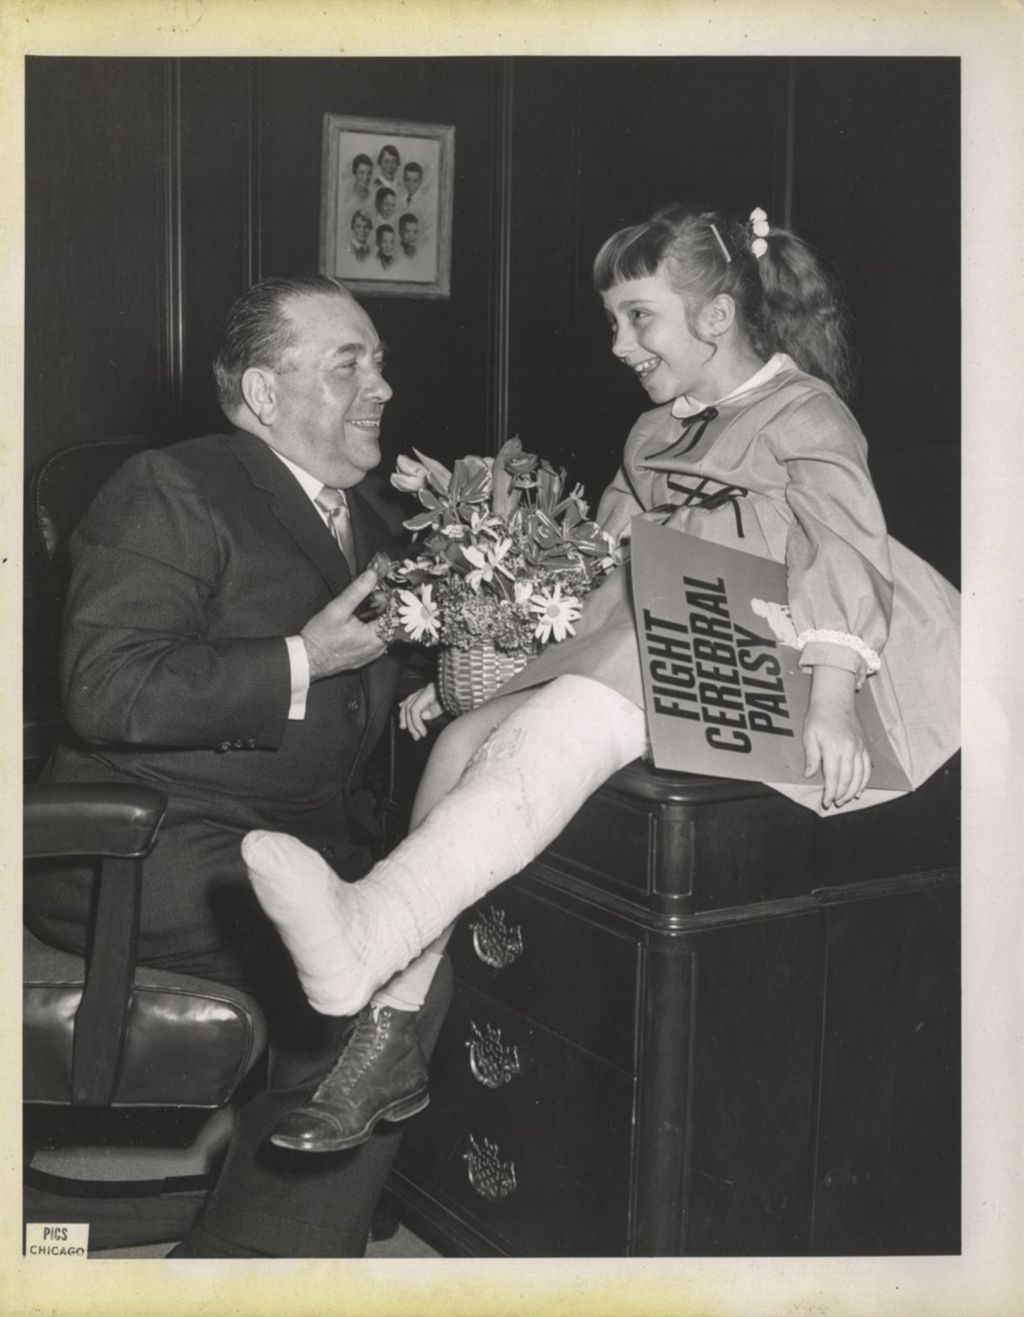 Richard J. Daley with a young girl holding a "Fight Cerebral Palsy" sign